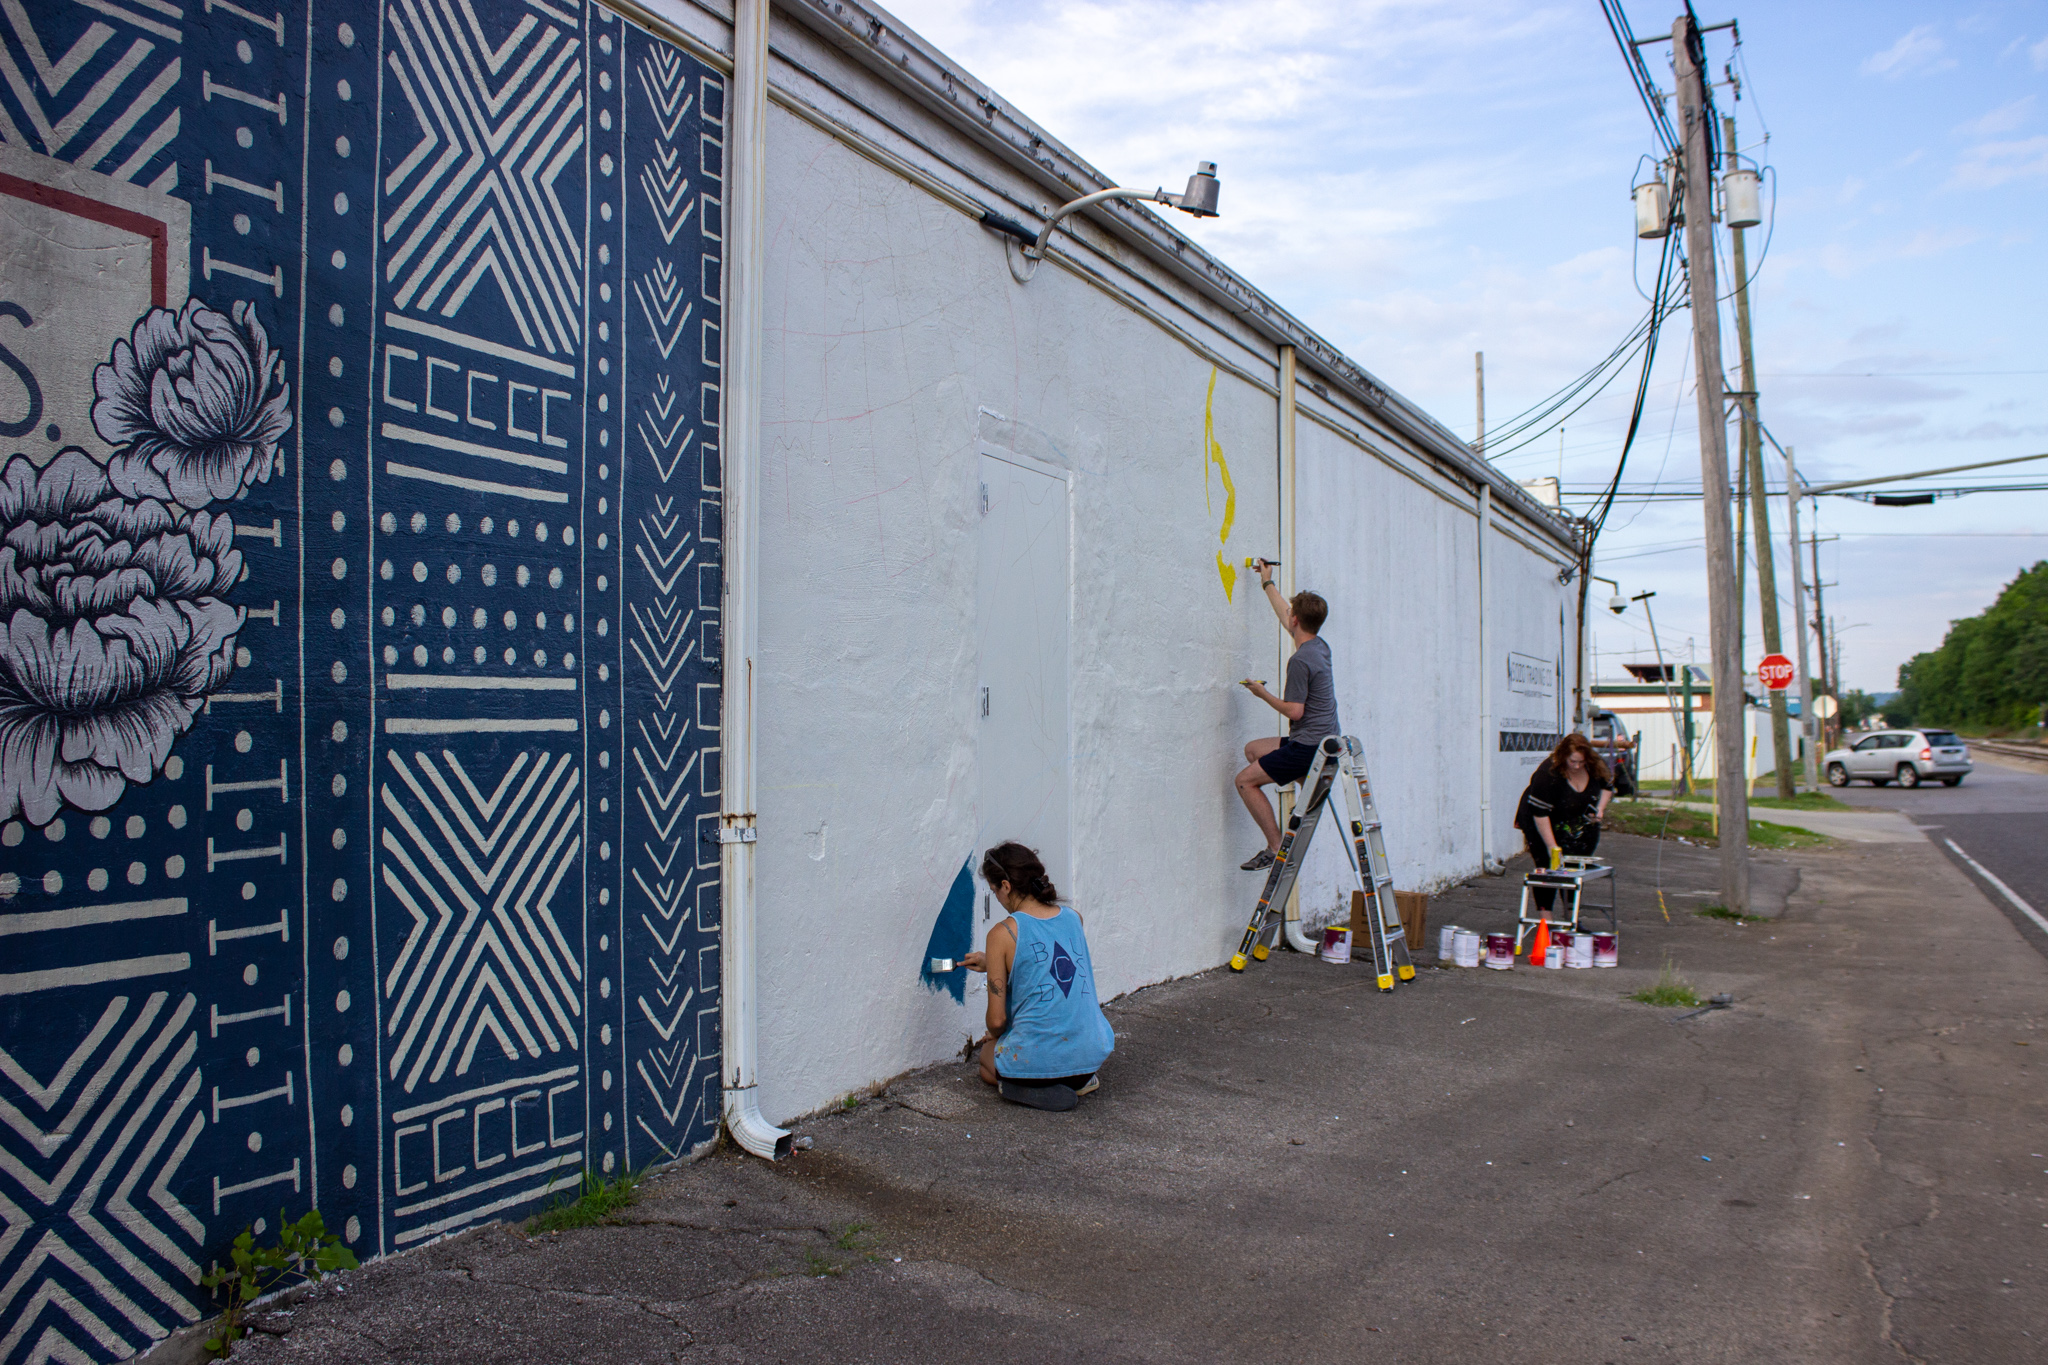 The new mural will overlook 1st Avenue. Photo by Libby Foster for Bham Now.